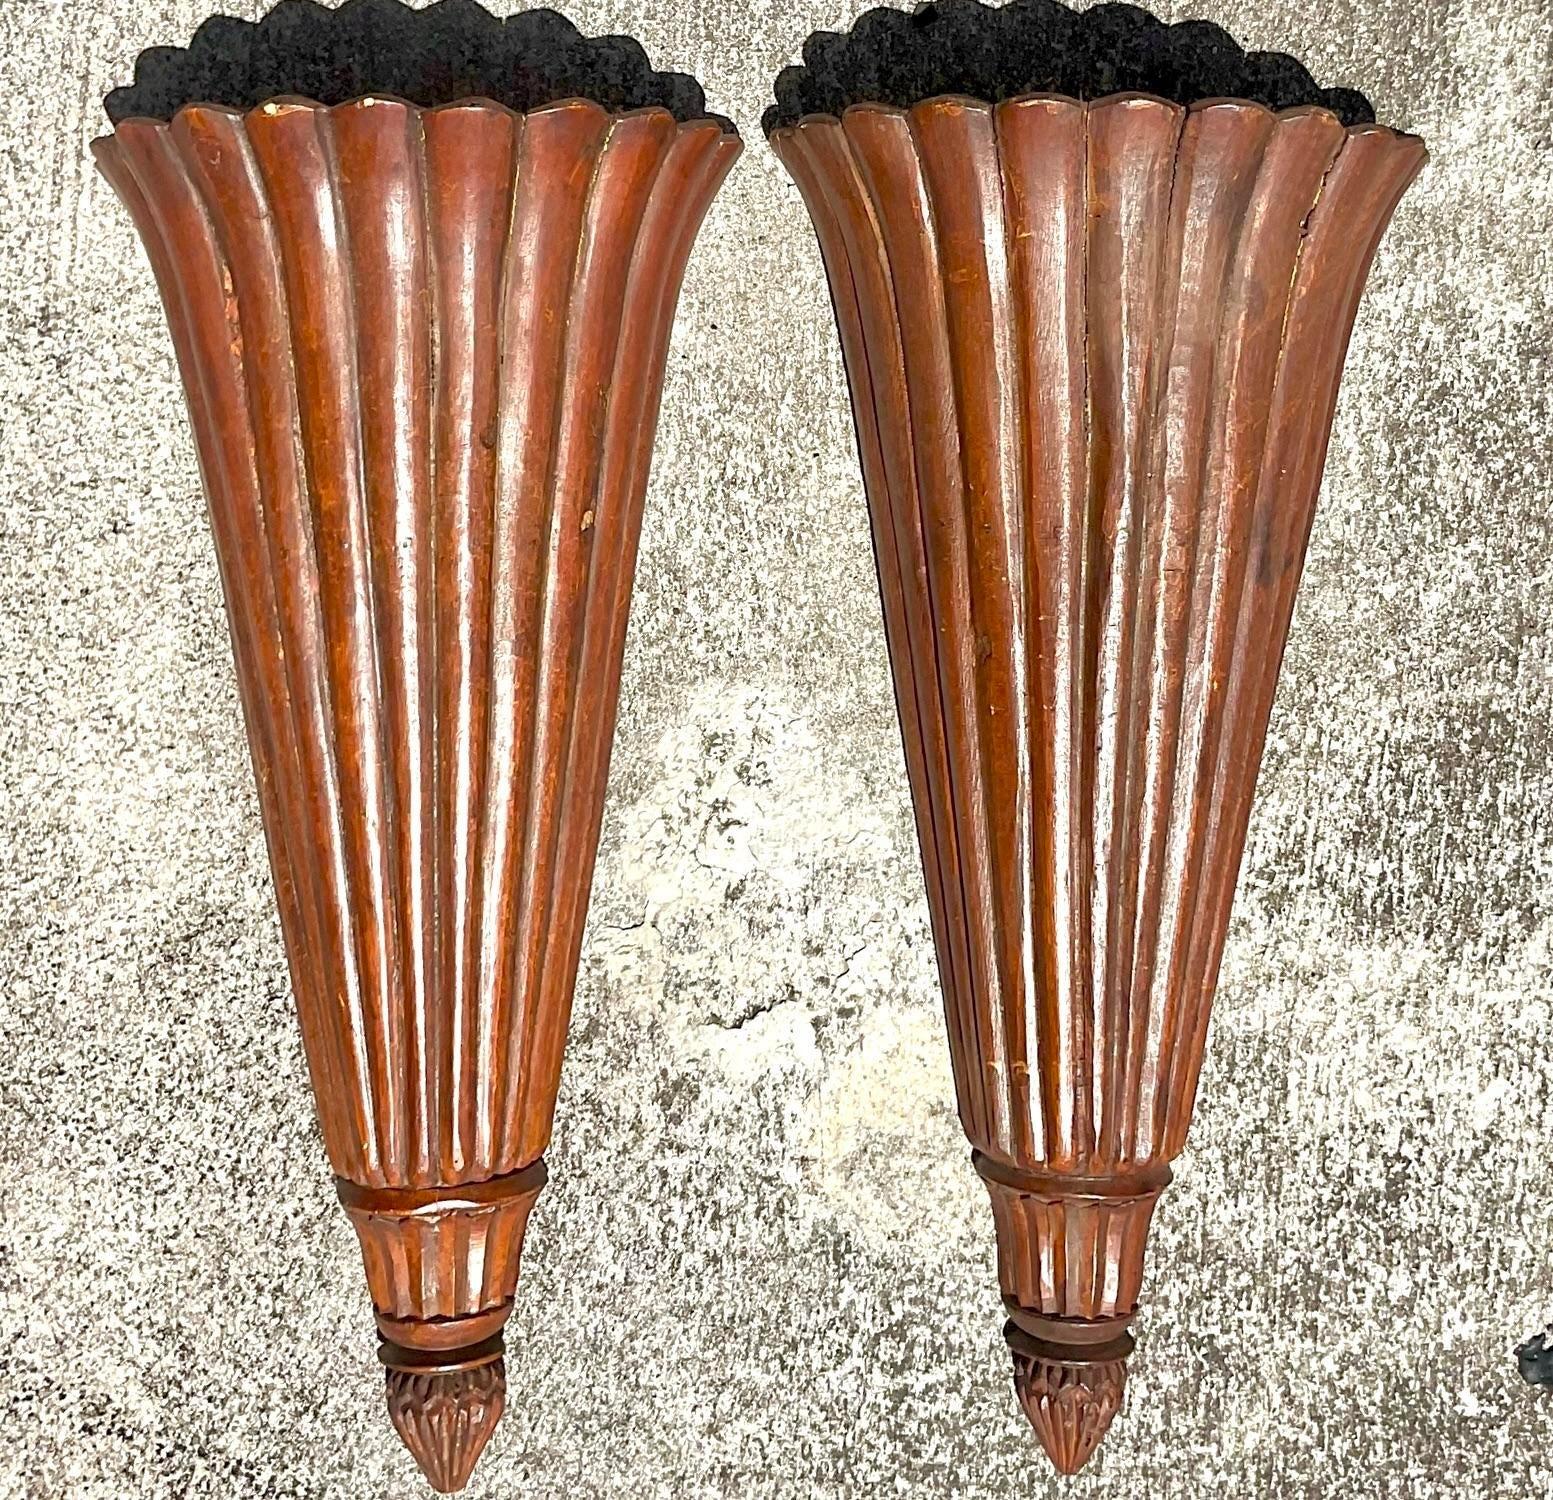 20th Century Vintage Boho Ribbed Wood Trumpet Sconces - a Pair For Sale